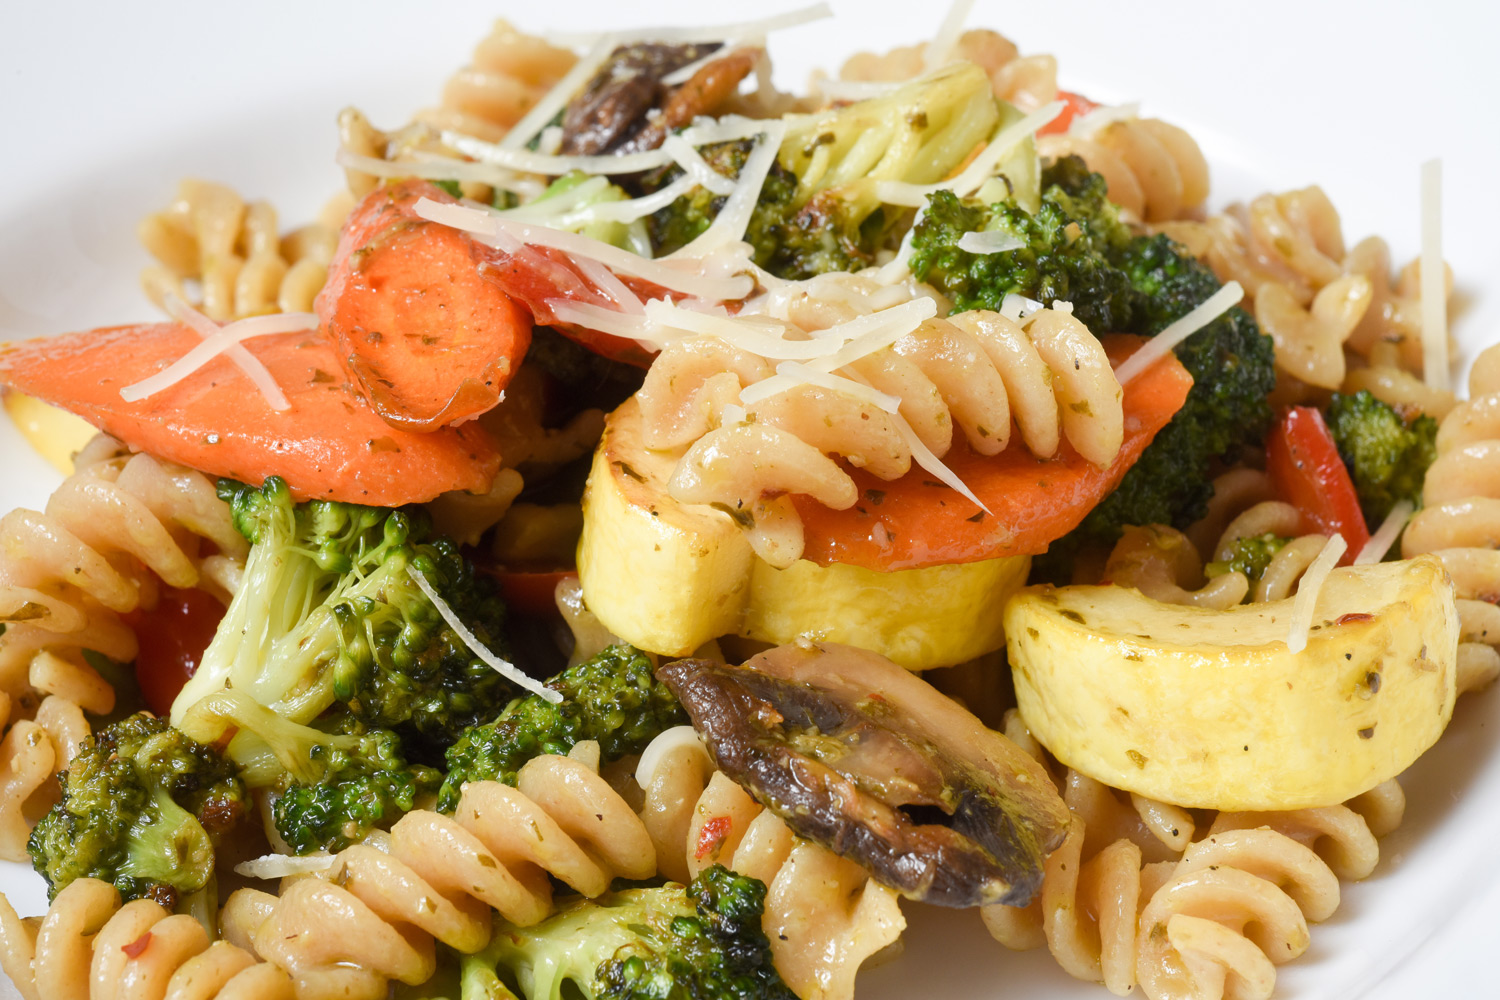 Whole Wheat Pasta with Pesto and Vegetables - Med Instead of Meds